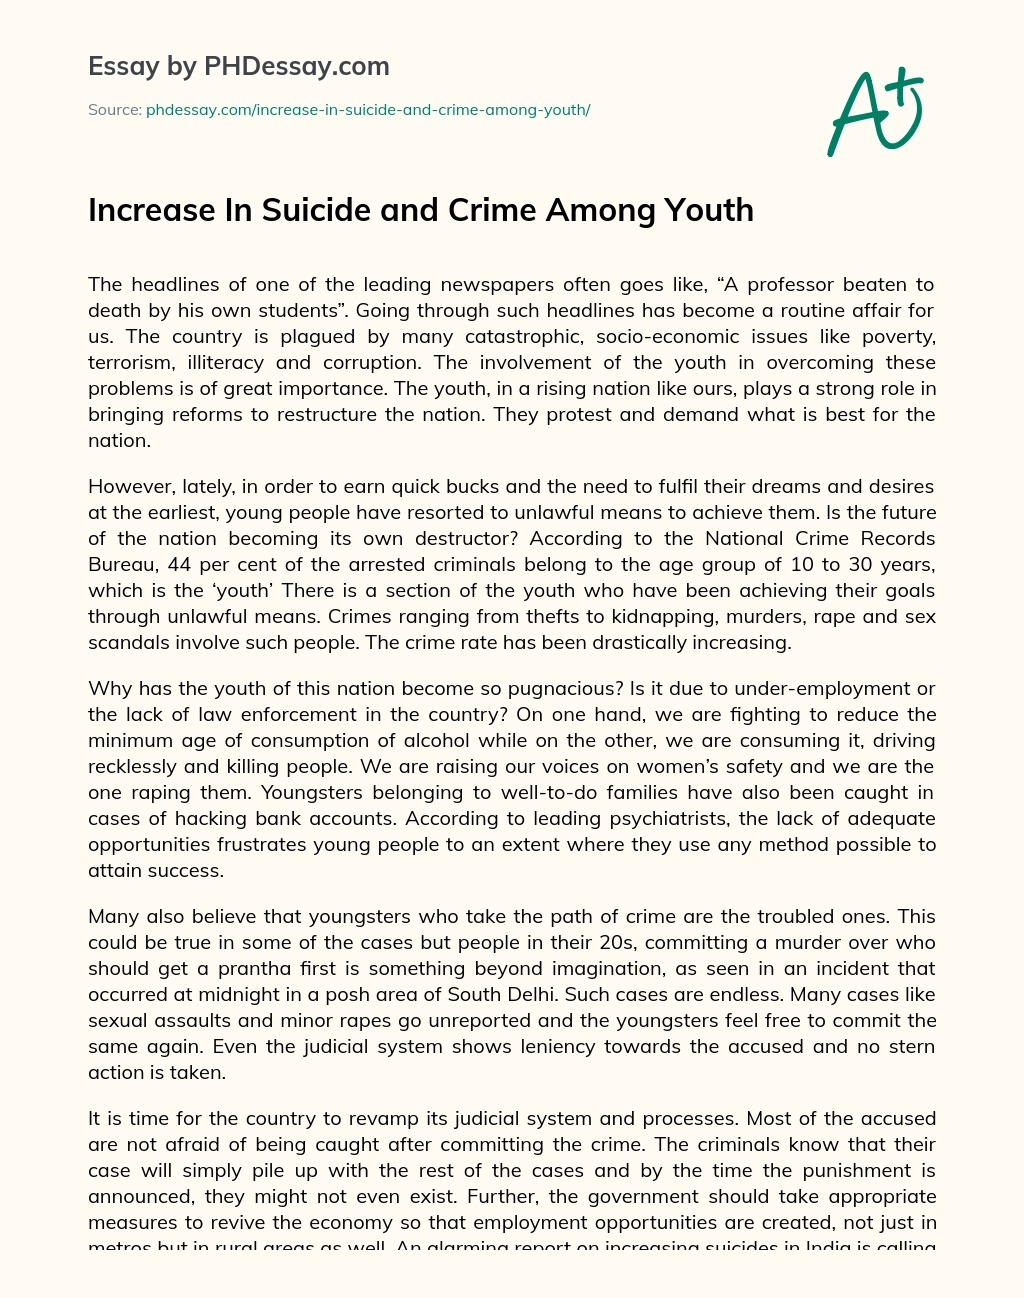 Increase In Suicide and Crime Among Youth essay